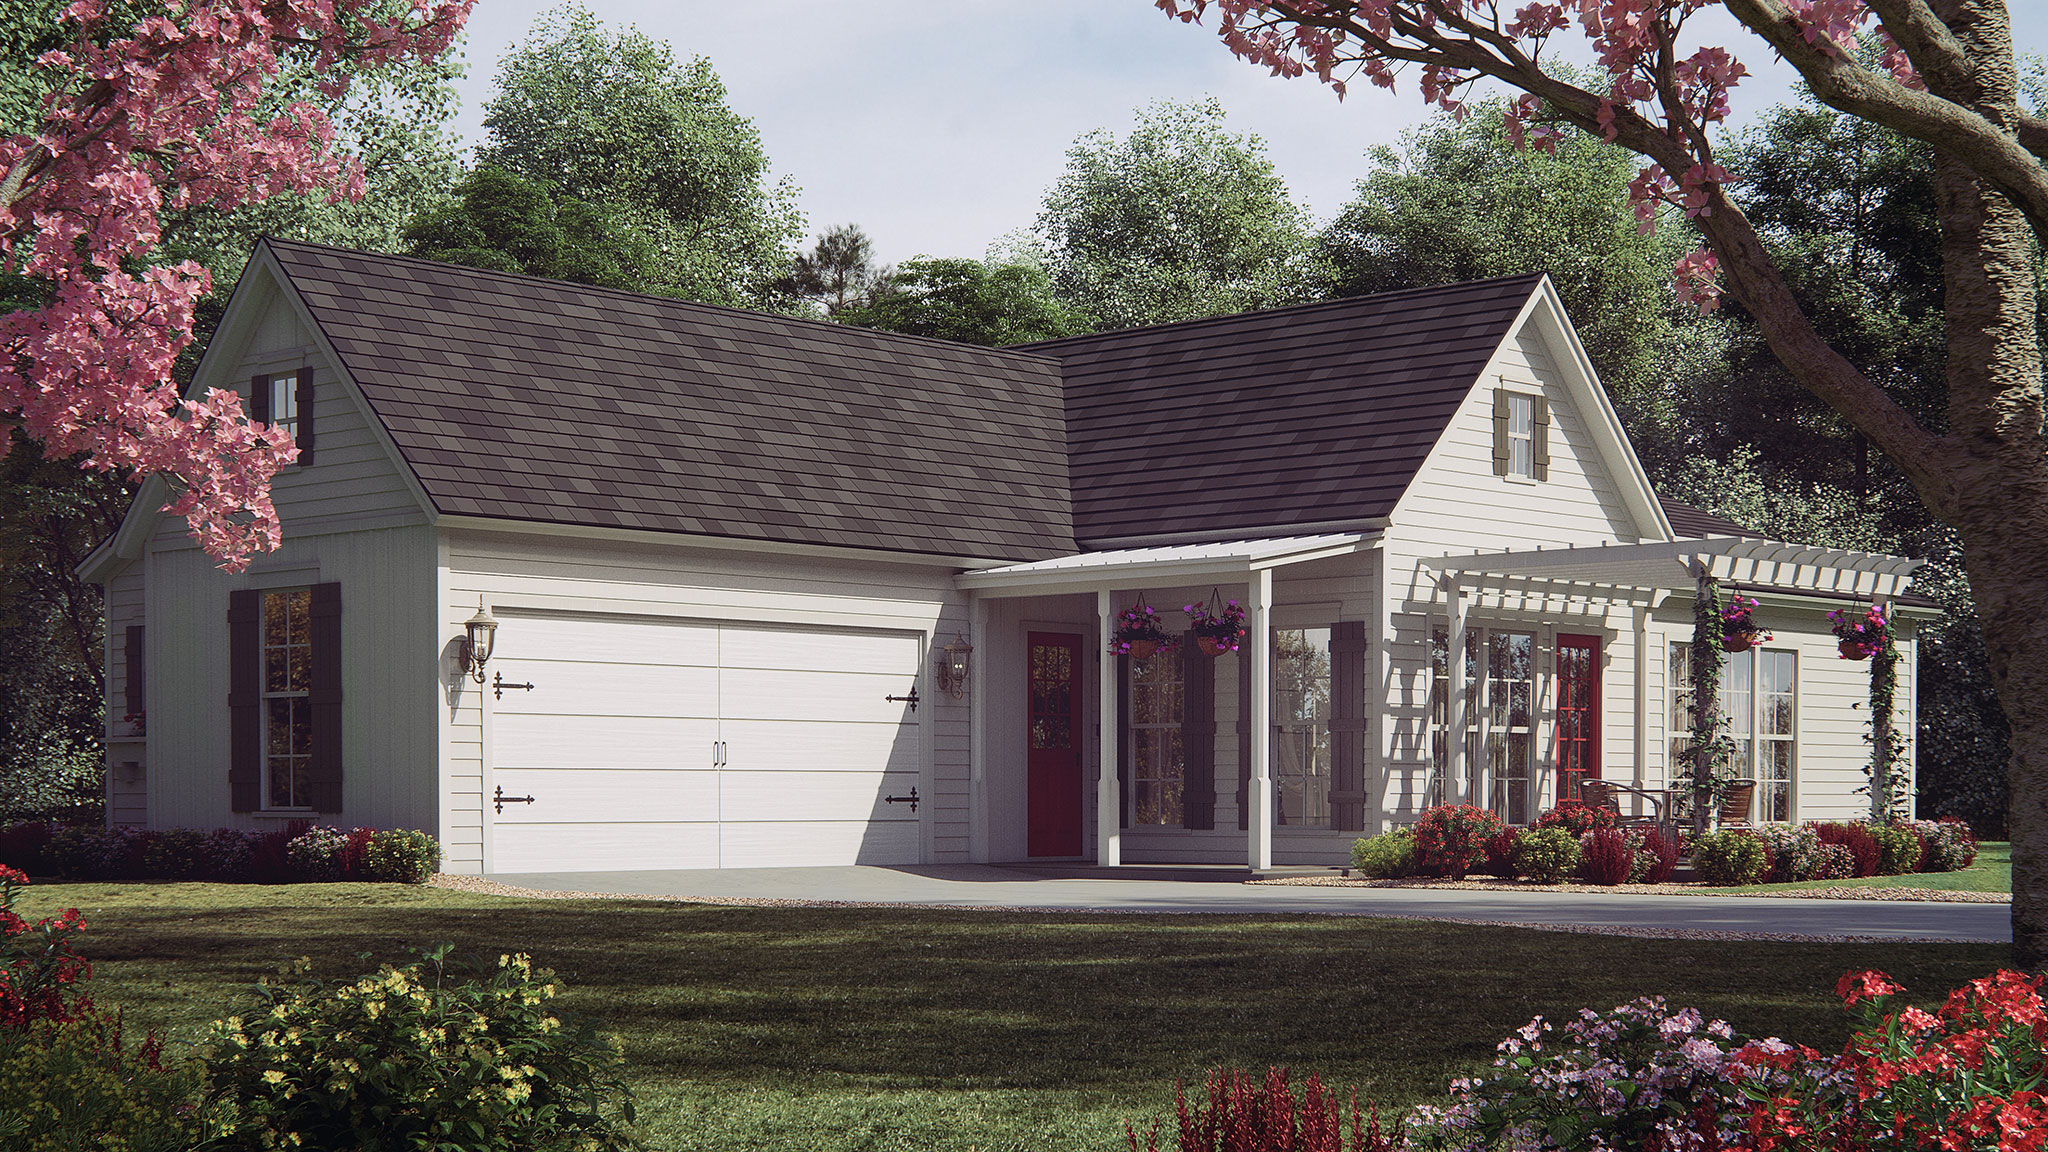 Copy of Country Cottage Rendering